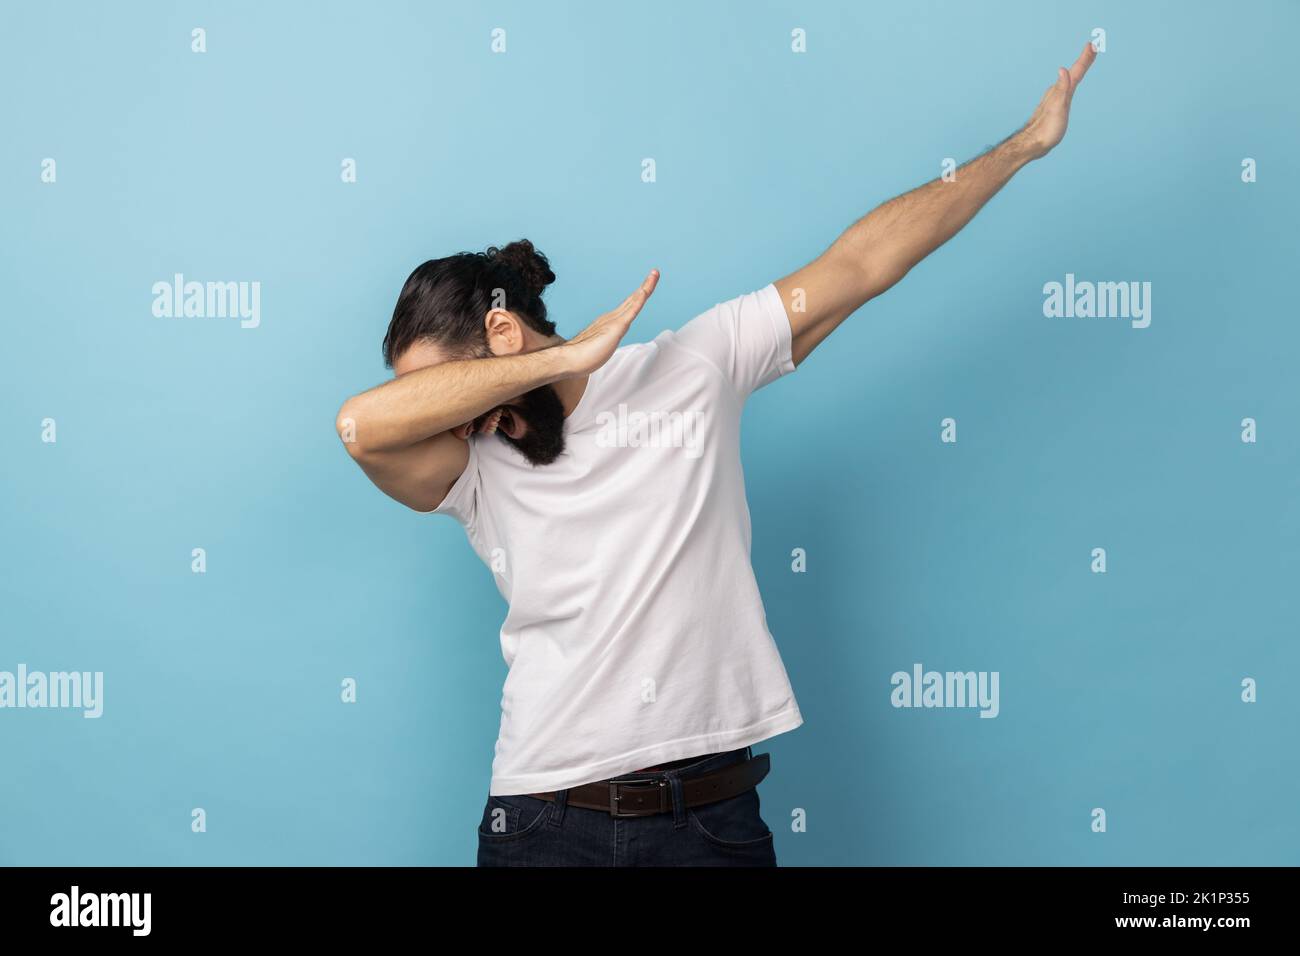 Portrait of anonymous unknown man with beard wearing white T-shirt standing in dab dance pose, internet meme, celebrating success. Indoor studio shot isolated on blue background. Stock Photo